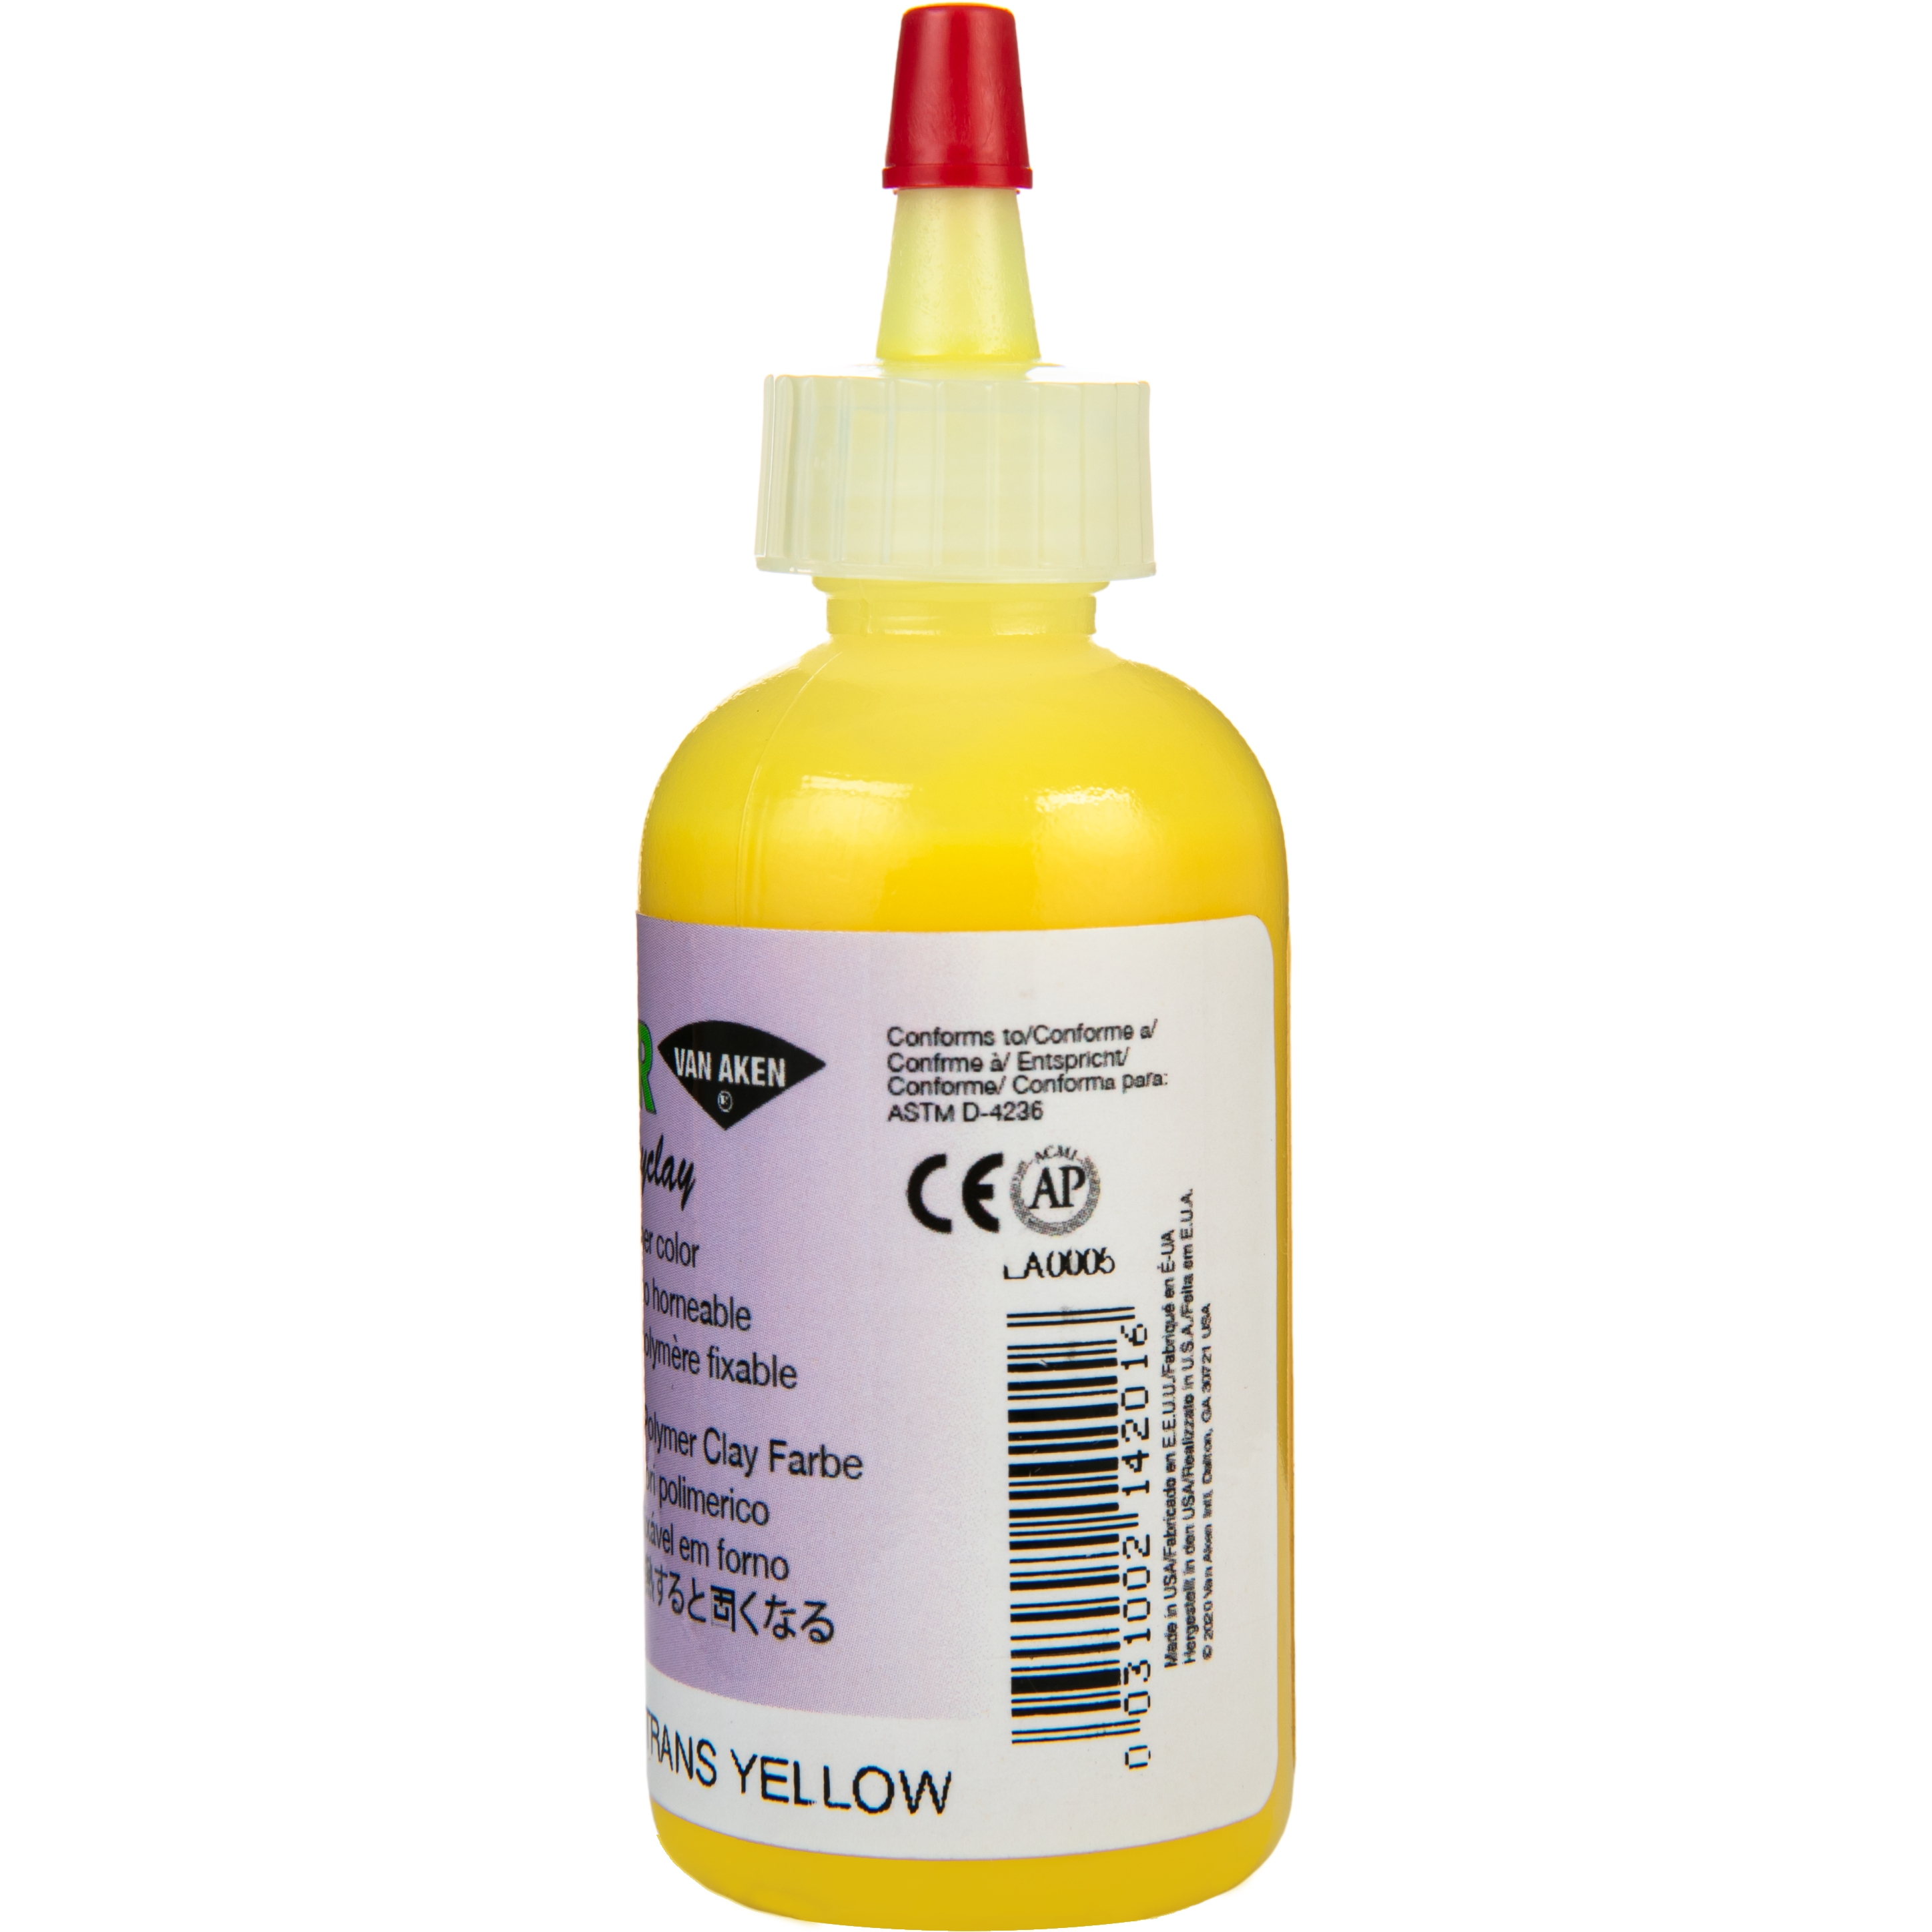 Inspire your style: Kato Overbaked Liquid Polymer Clay, Liquid  Polyclay-Yellow 56ml KAT